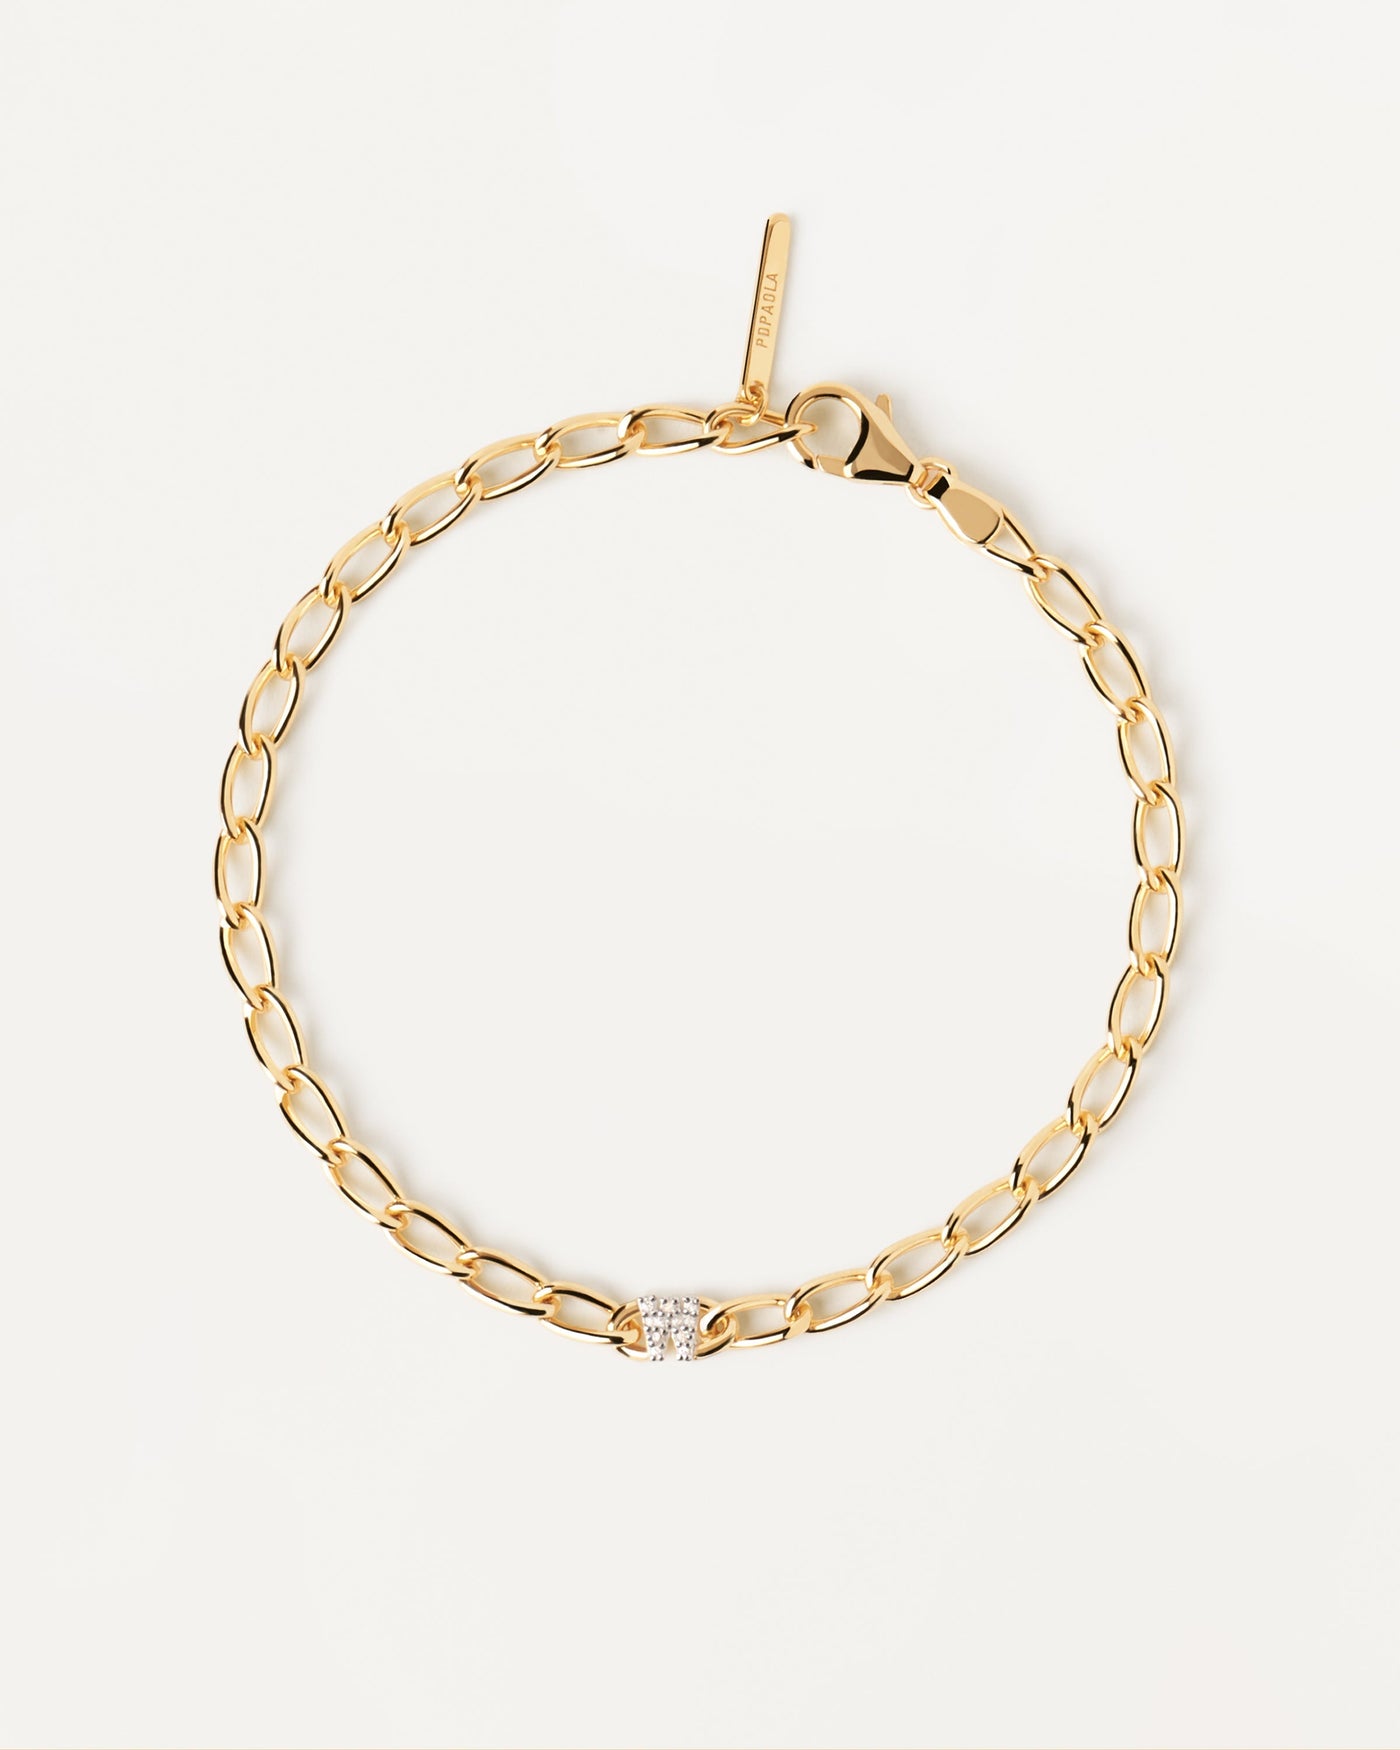 2023 Selection | Letter W Chain Bracelet. cable chain bracelet in gold-plated silver with initial W in zirconia. Get the latest arrival from PDPAOLA. Place your order safely and get this Best Seller. Free Shipping.